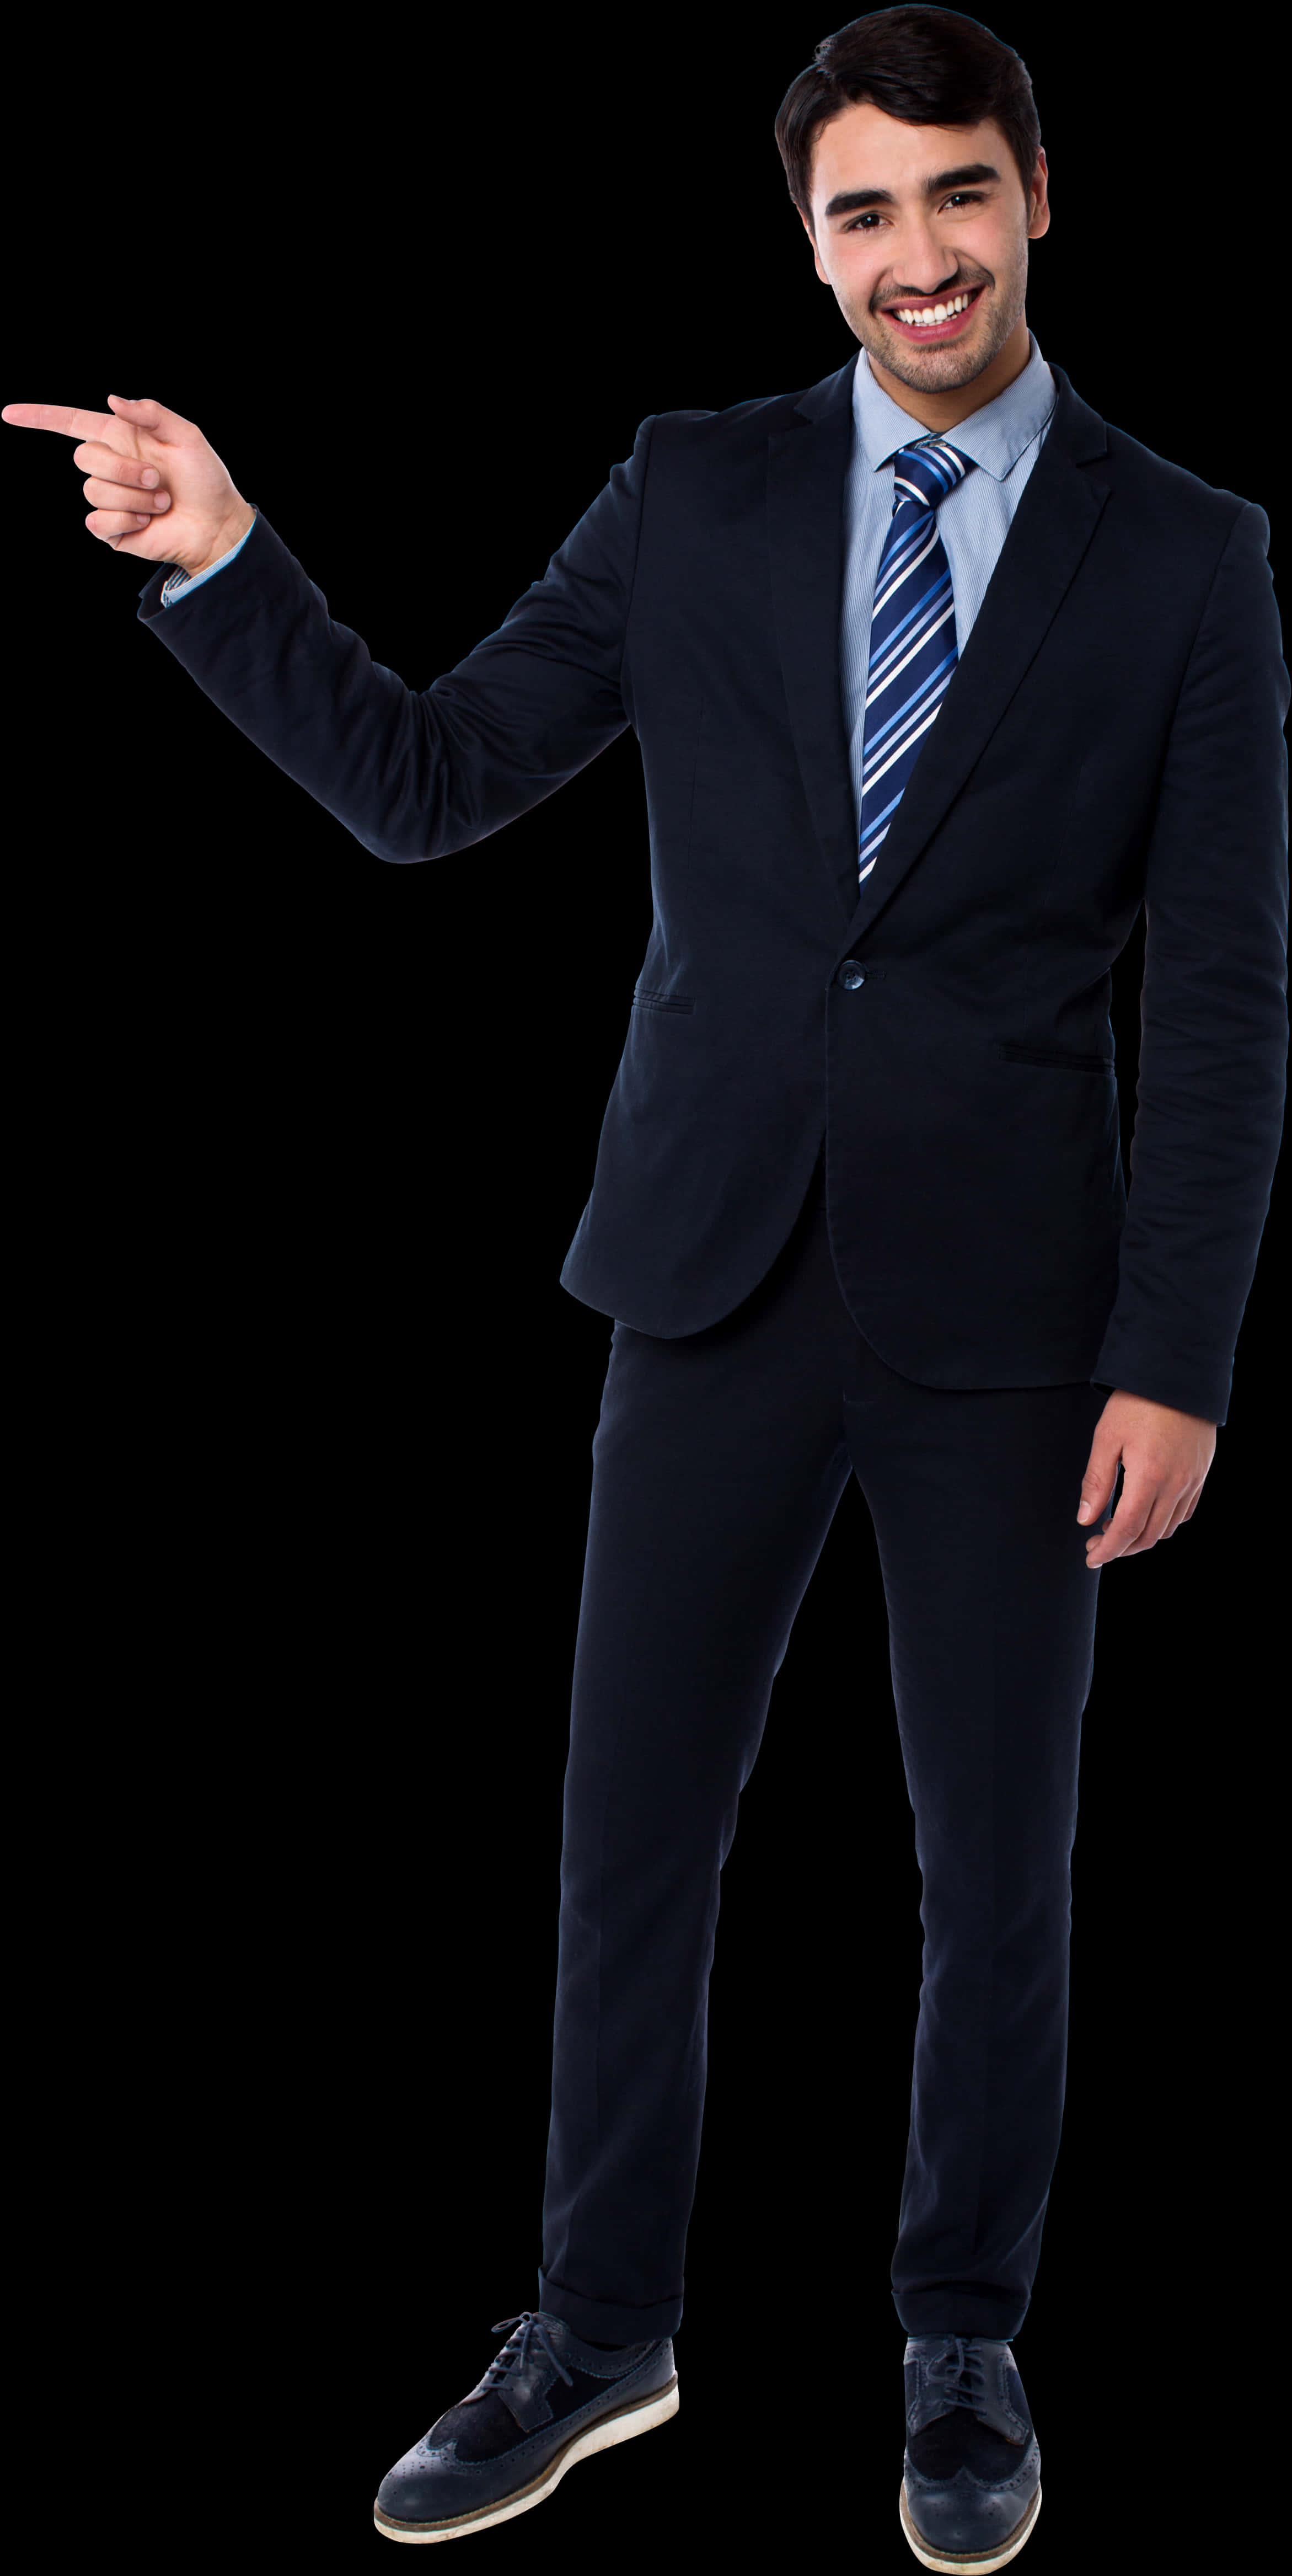 Professional Man Pointingin Suit PNG